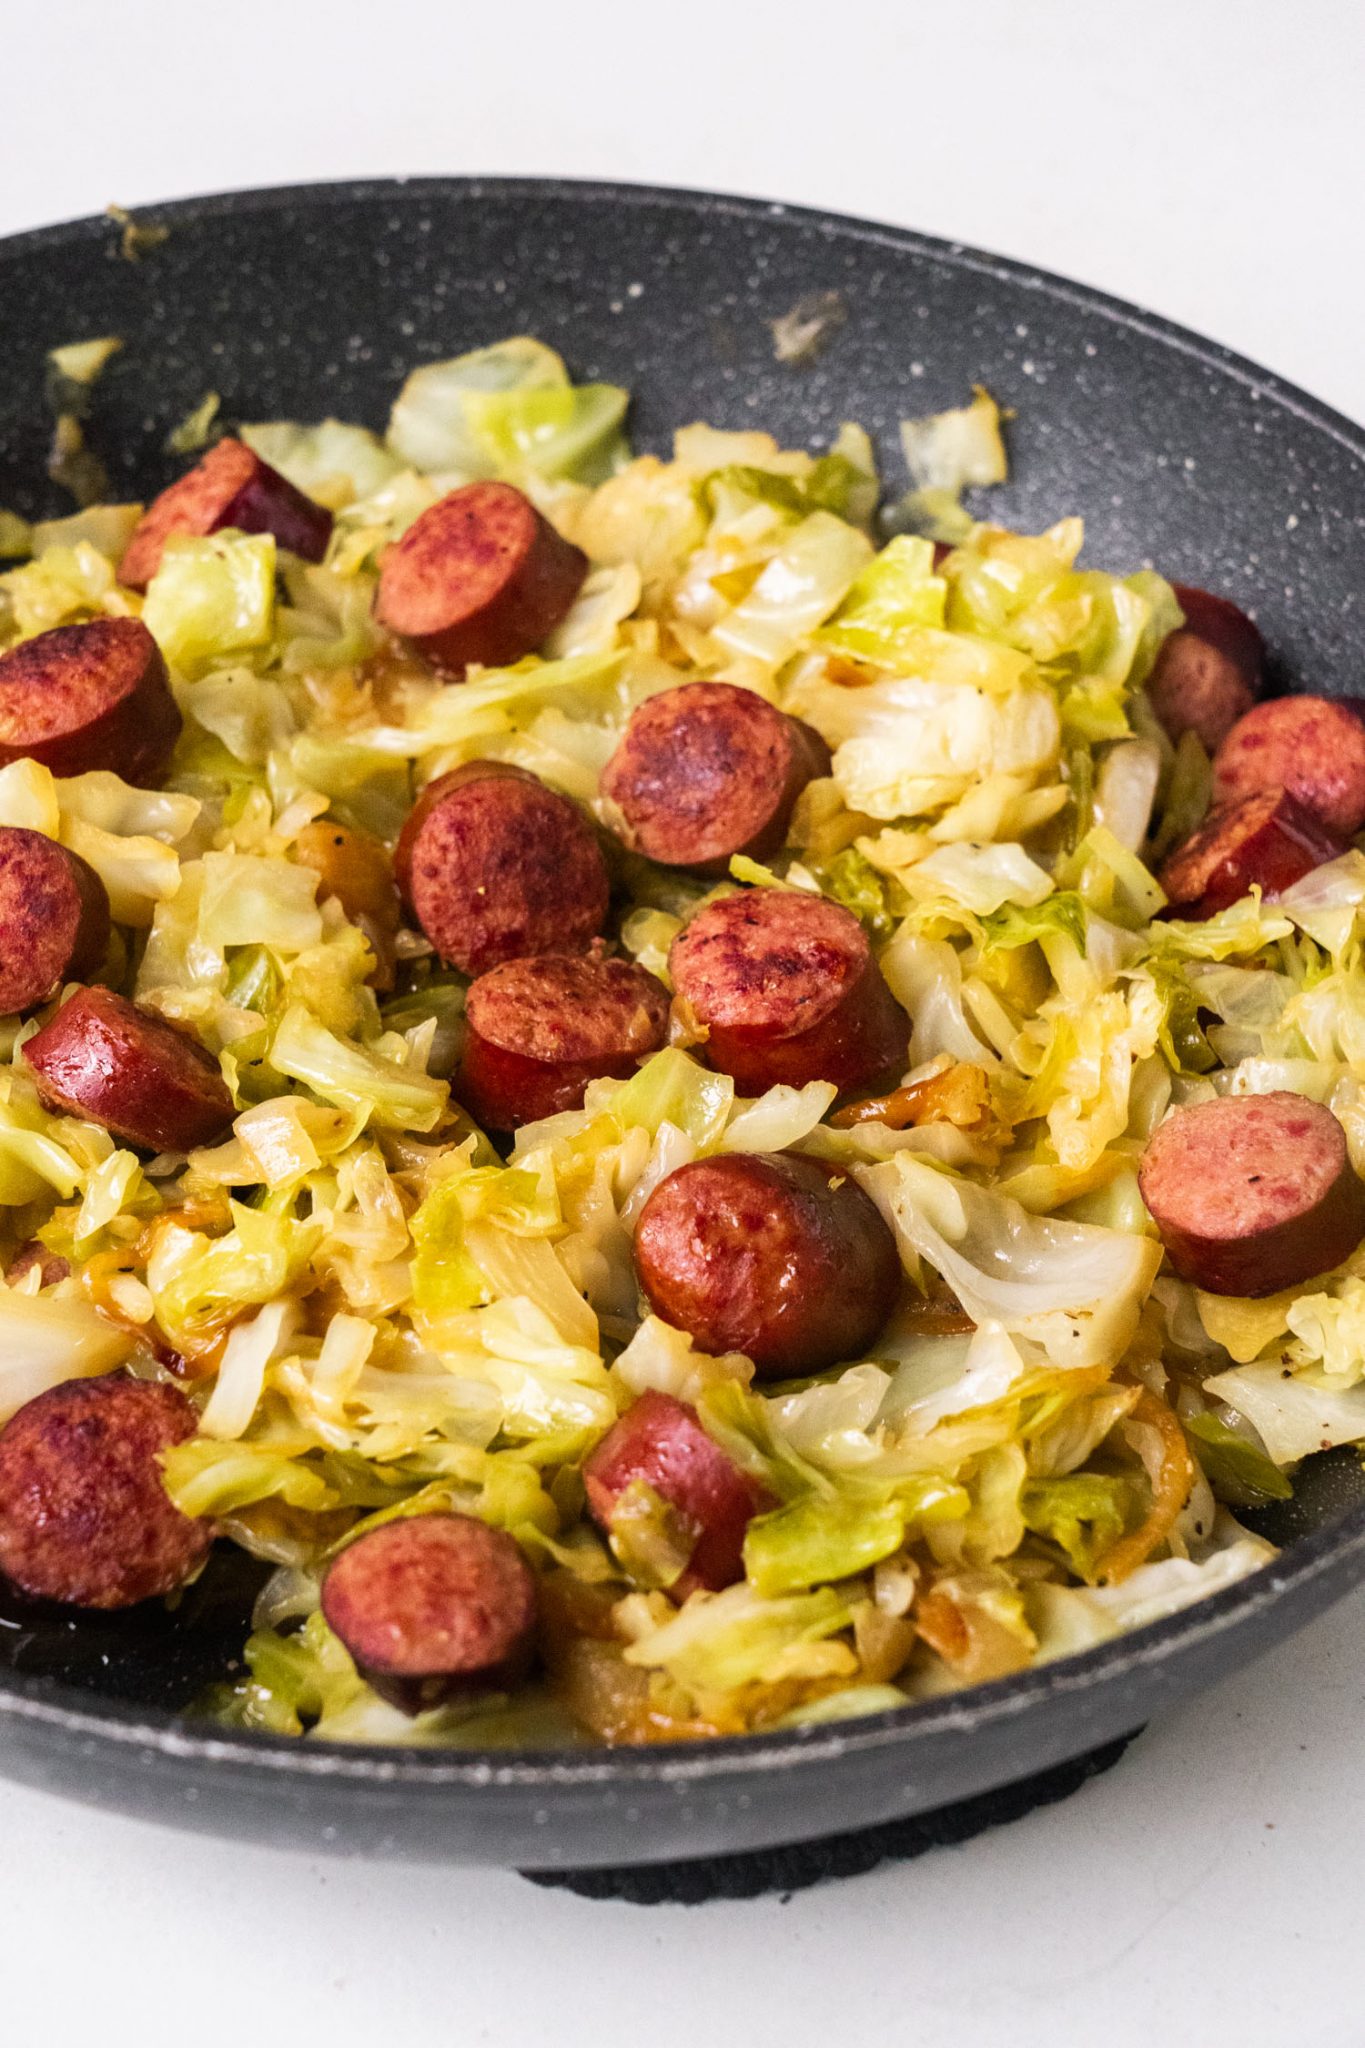 Fried Cabbage With Sausage - Brooklyn Farm Girl